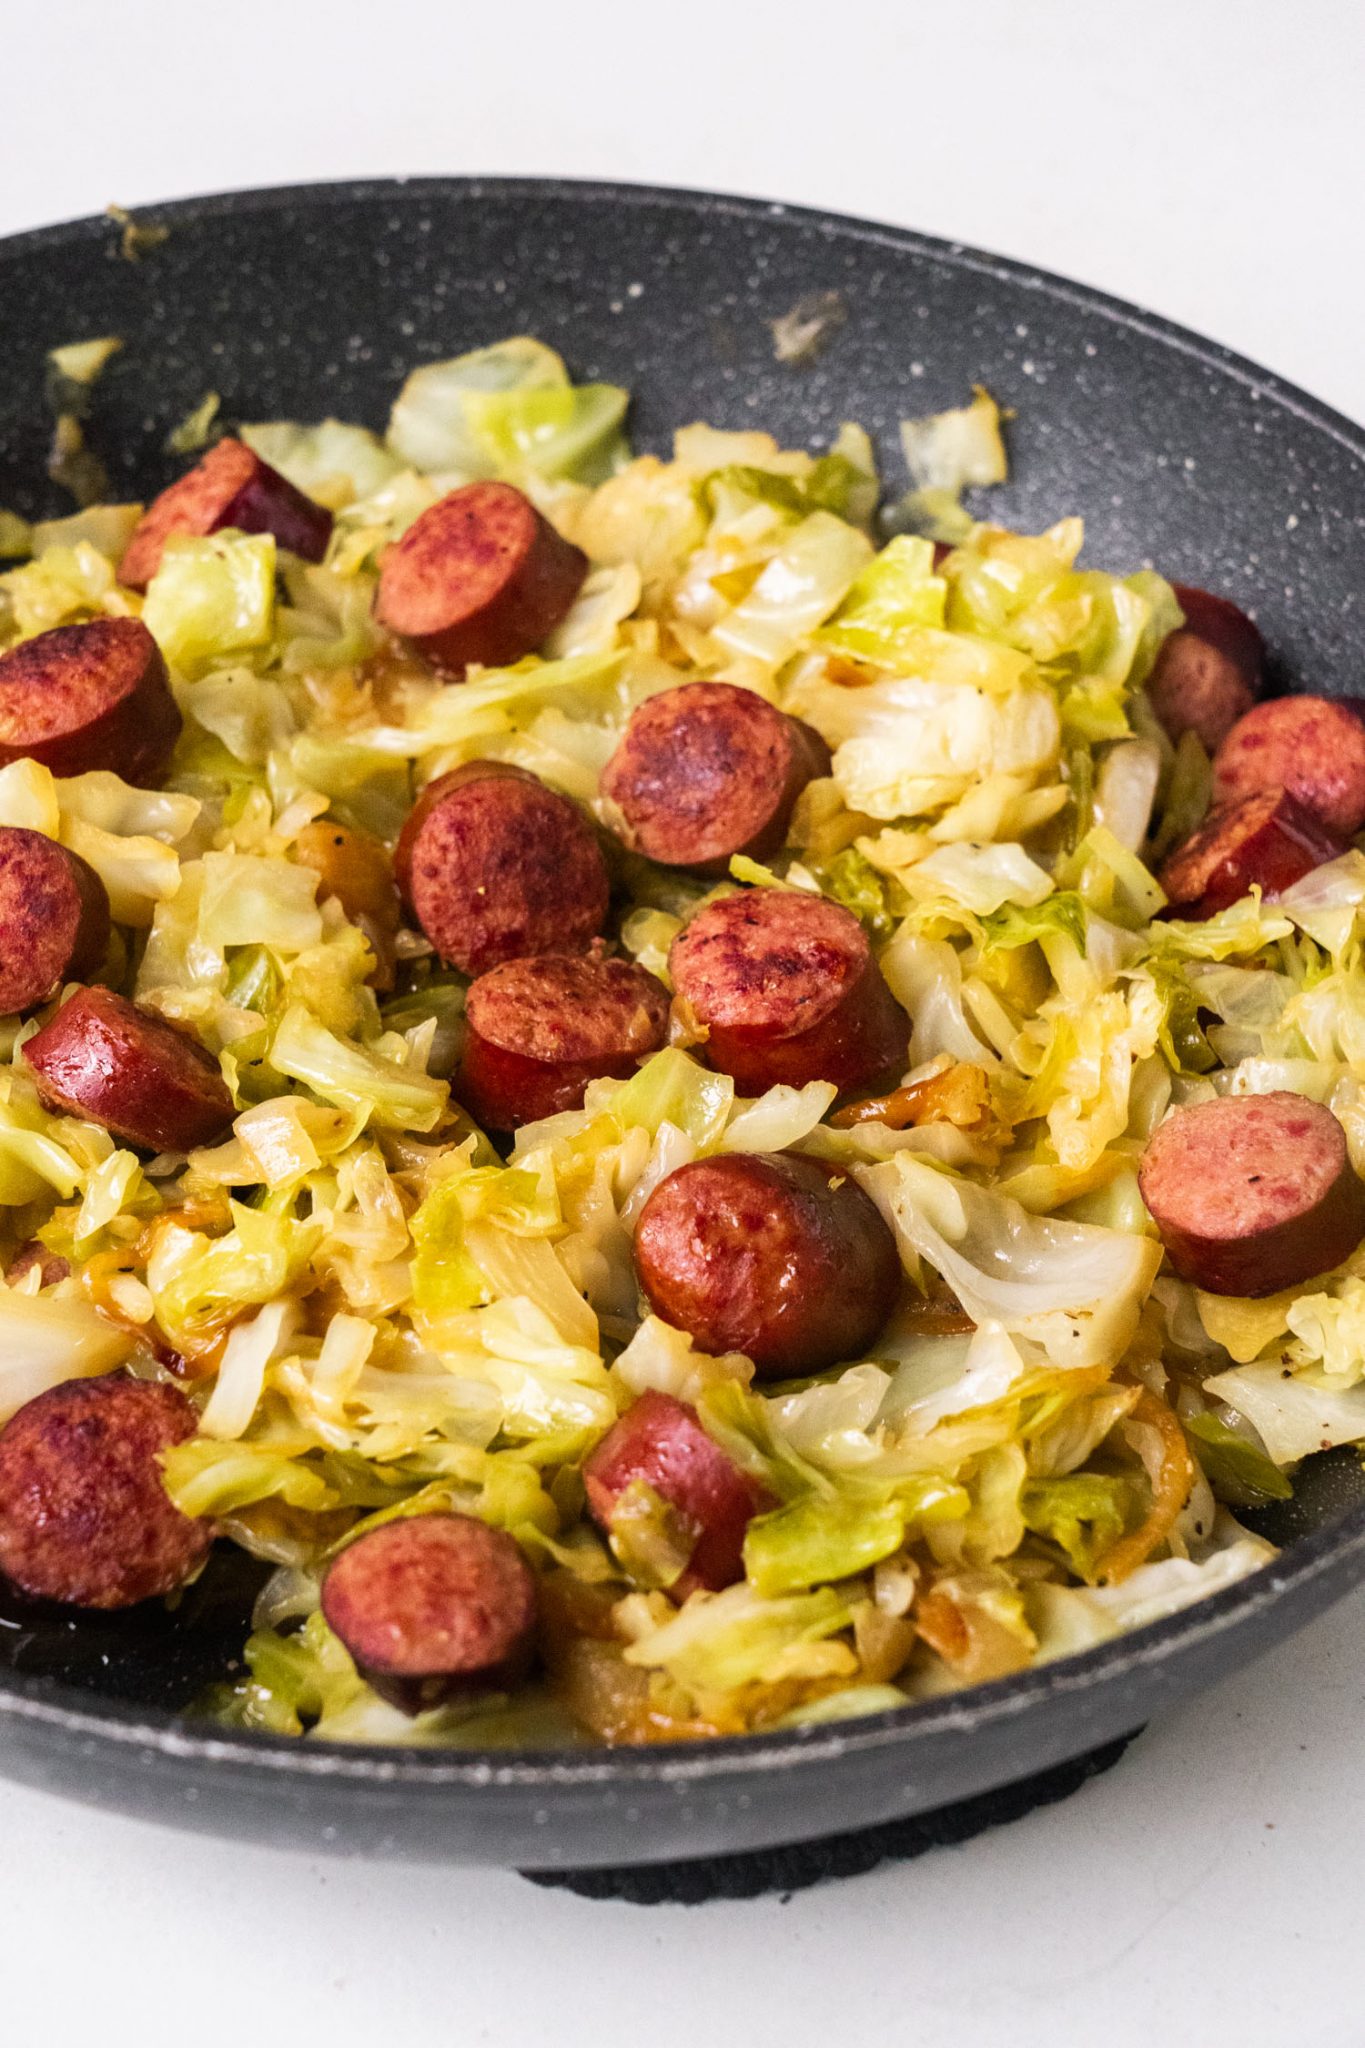 Fried Cabbage With Sausage - Brooklyn Farm Girl